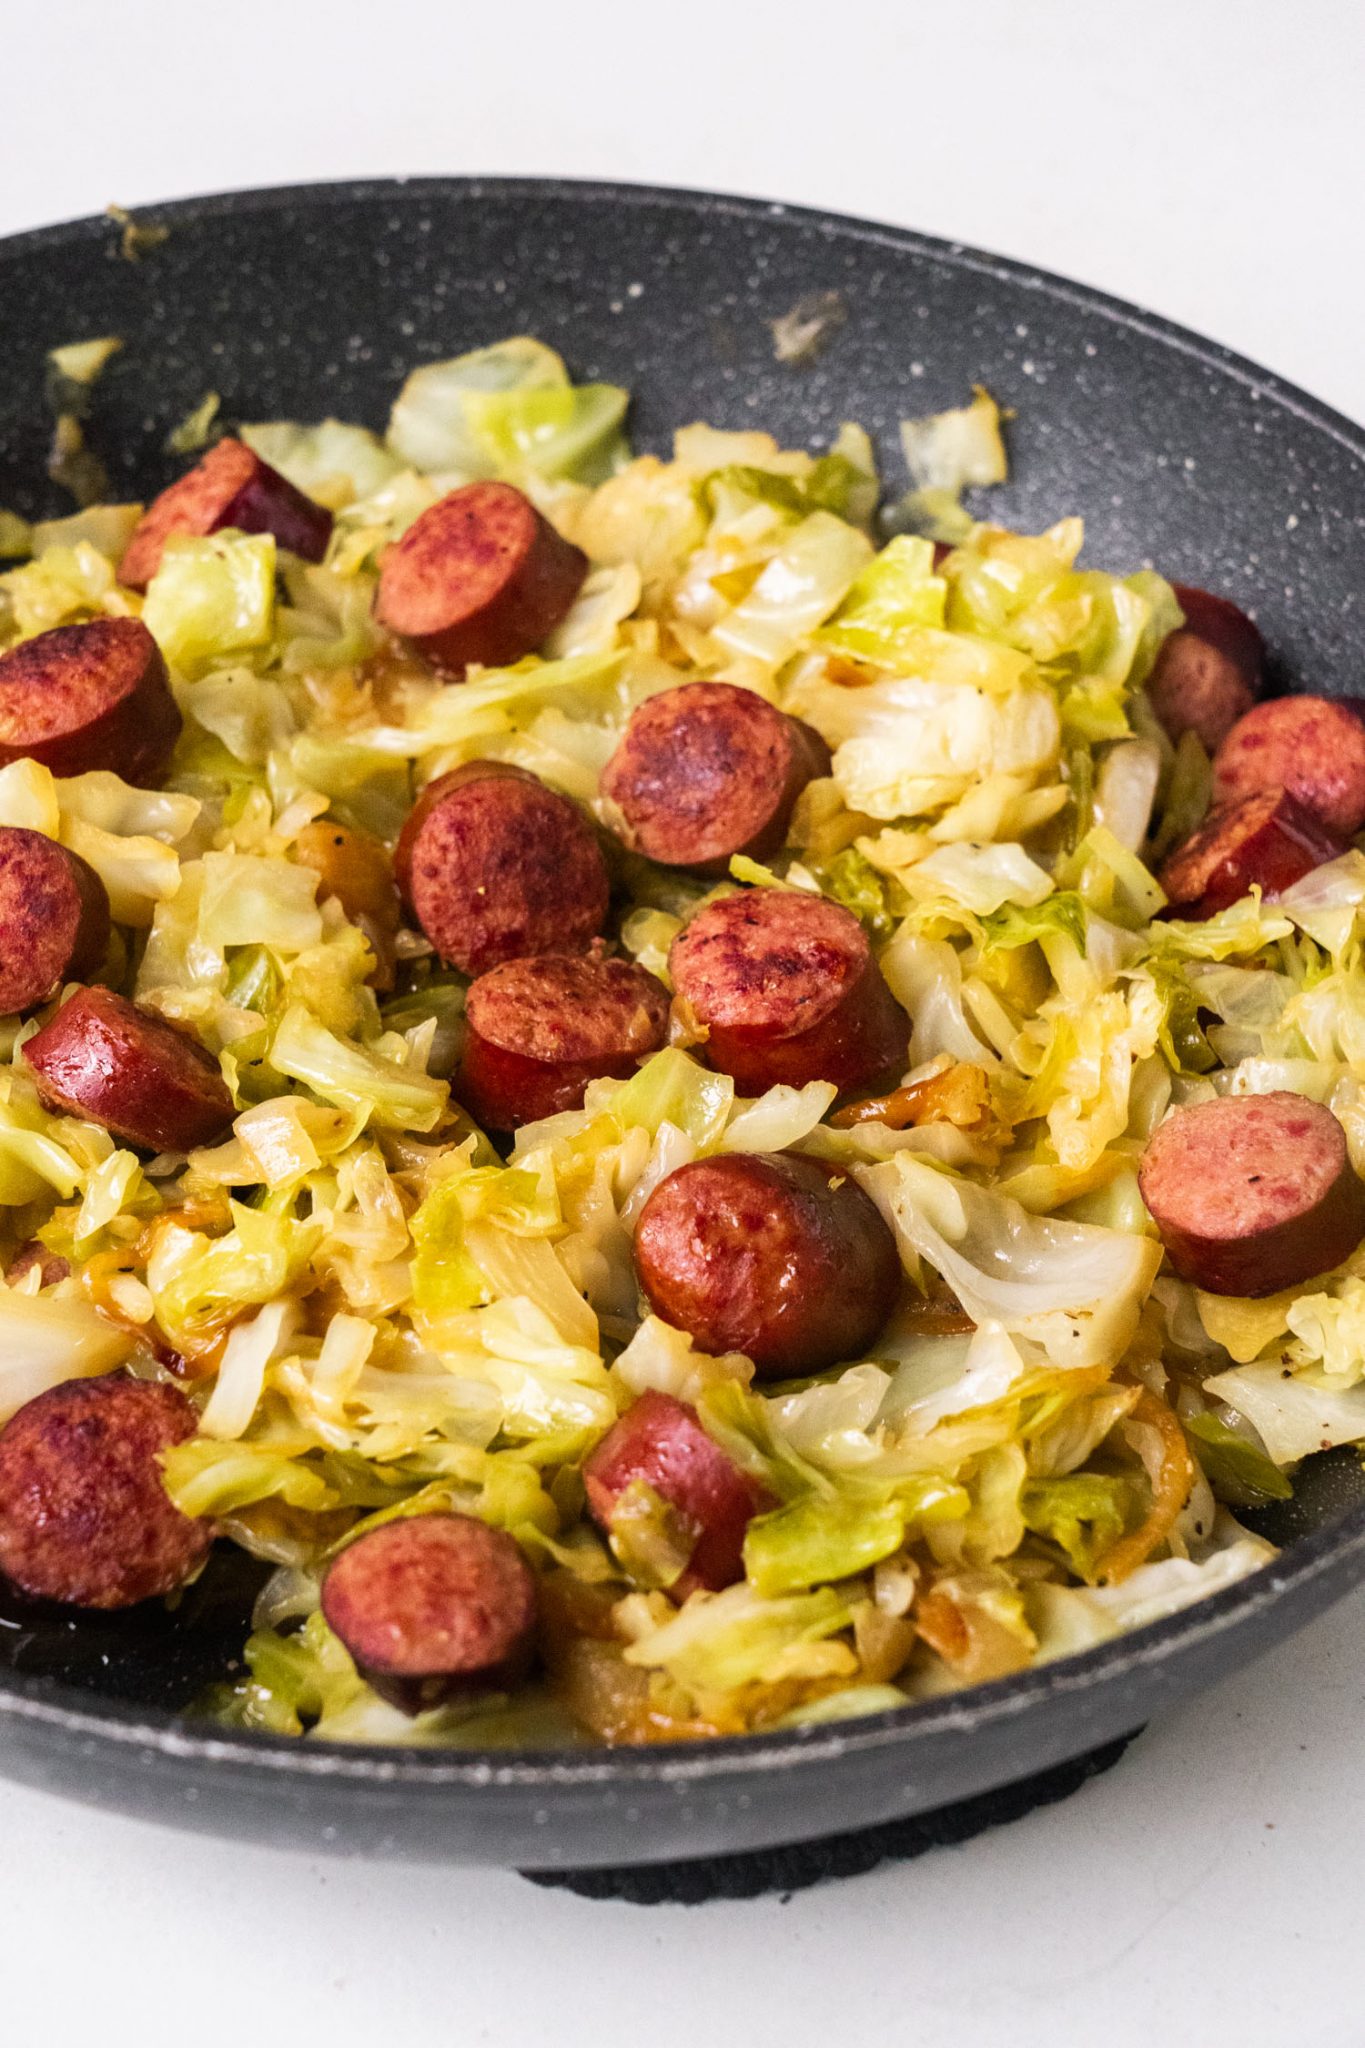 Fried Cabbage With Sausage - Brooklyn Farm Girl